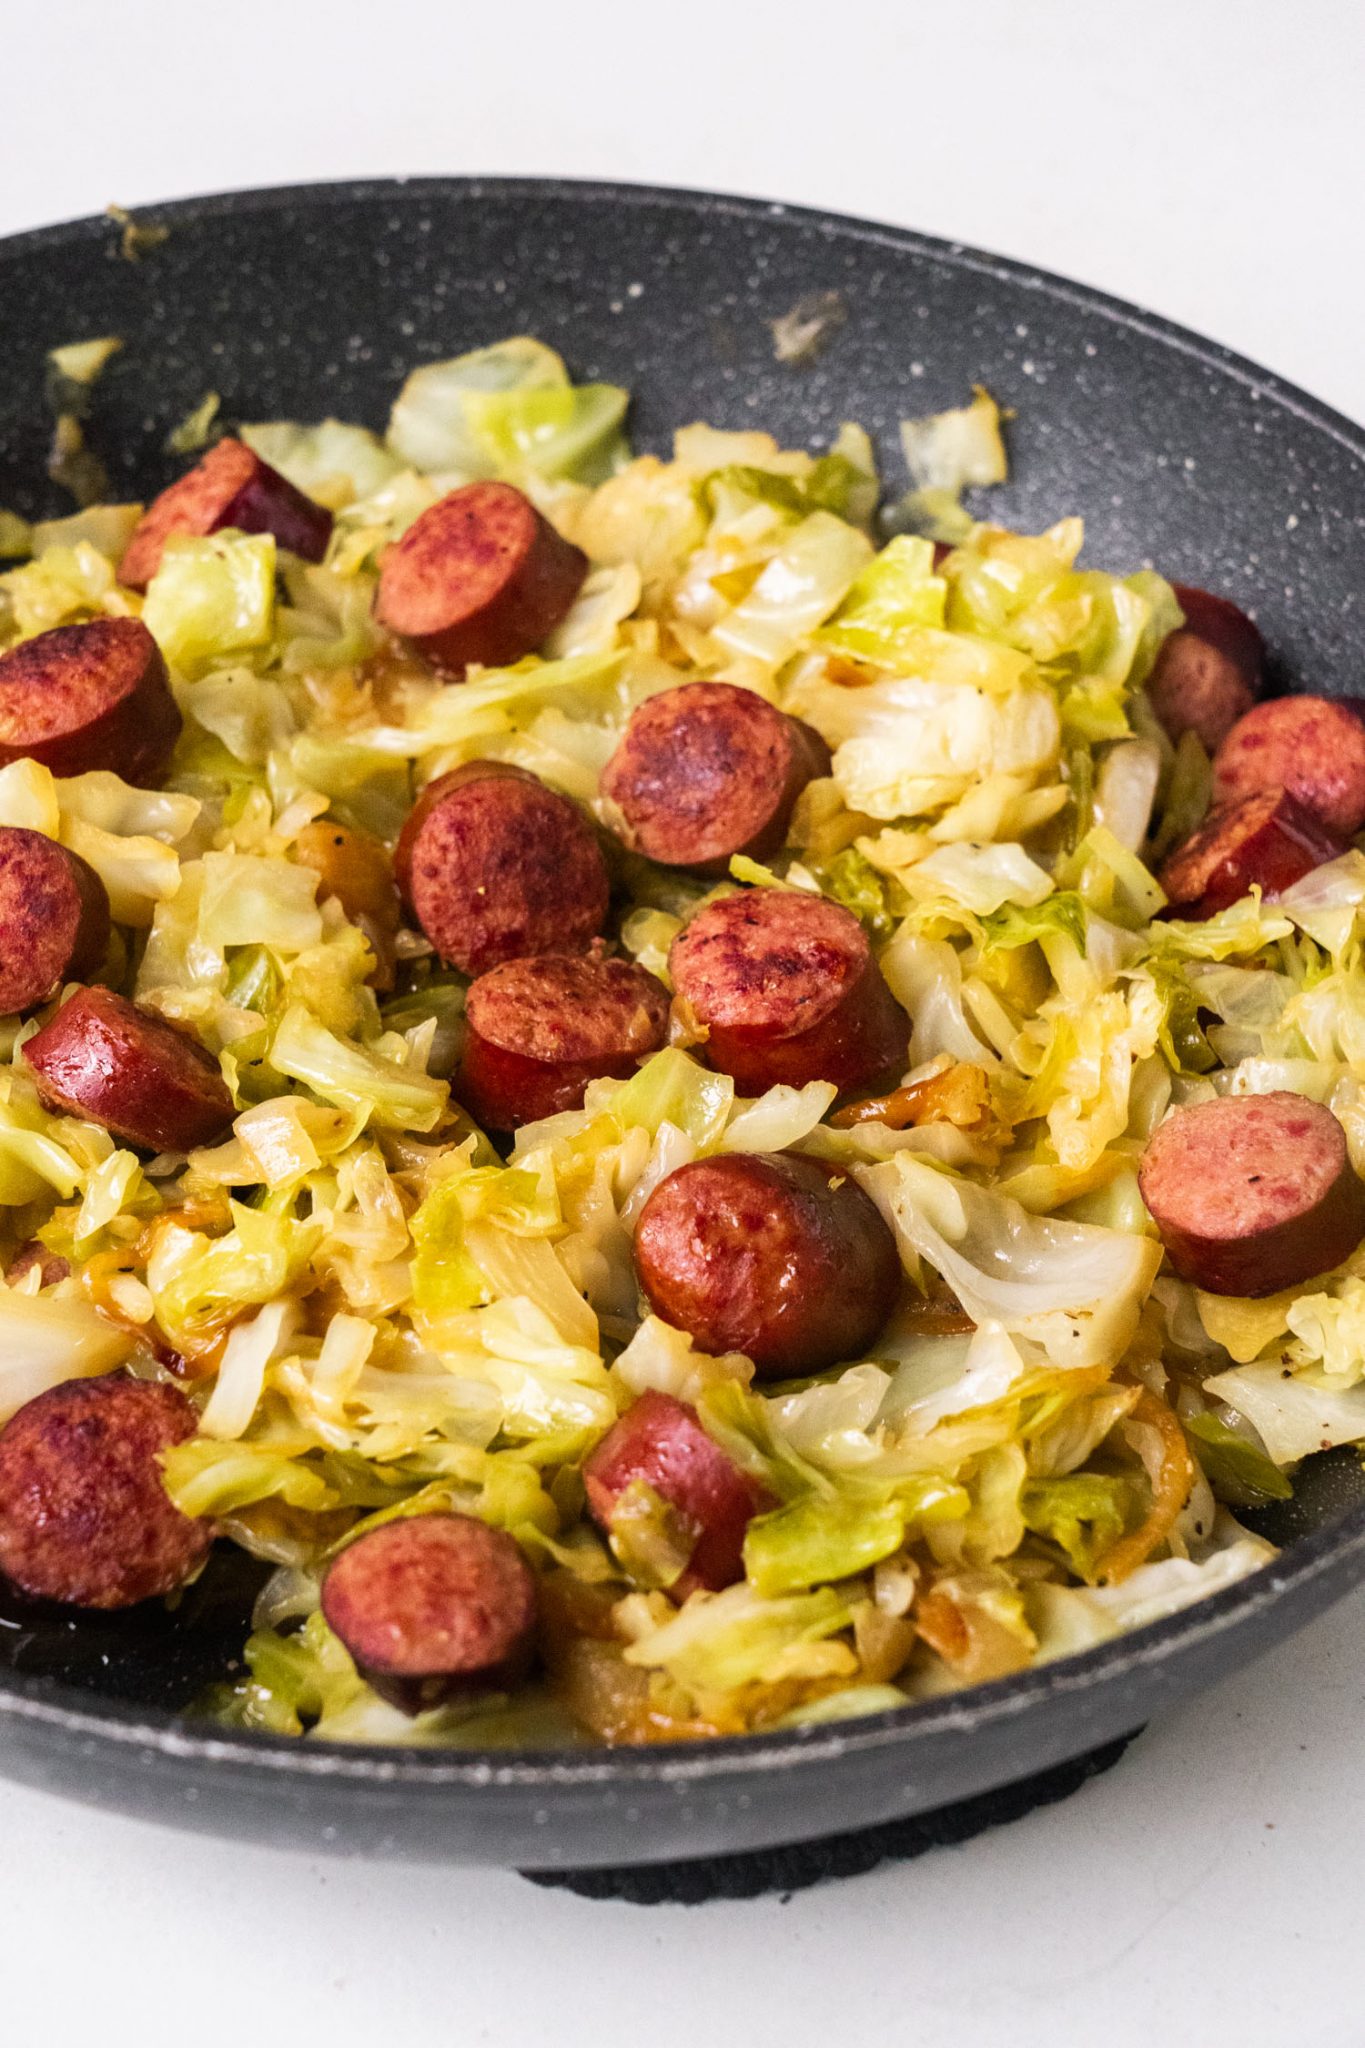 Fried Cabbage With Sausage - Brooklyn Farm Girl